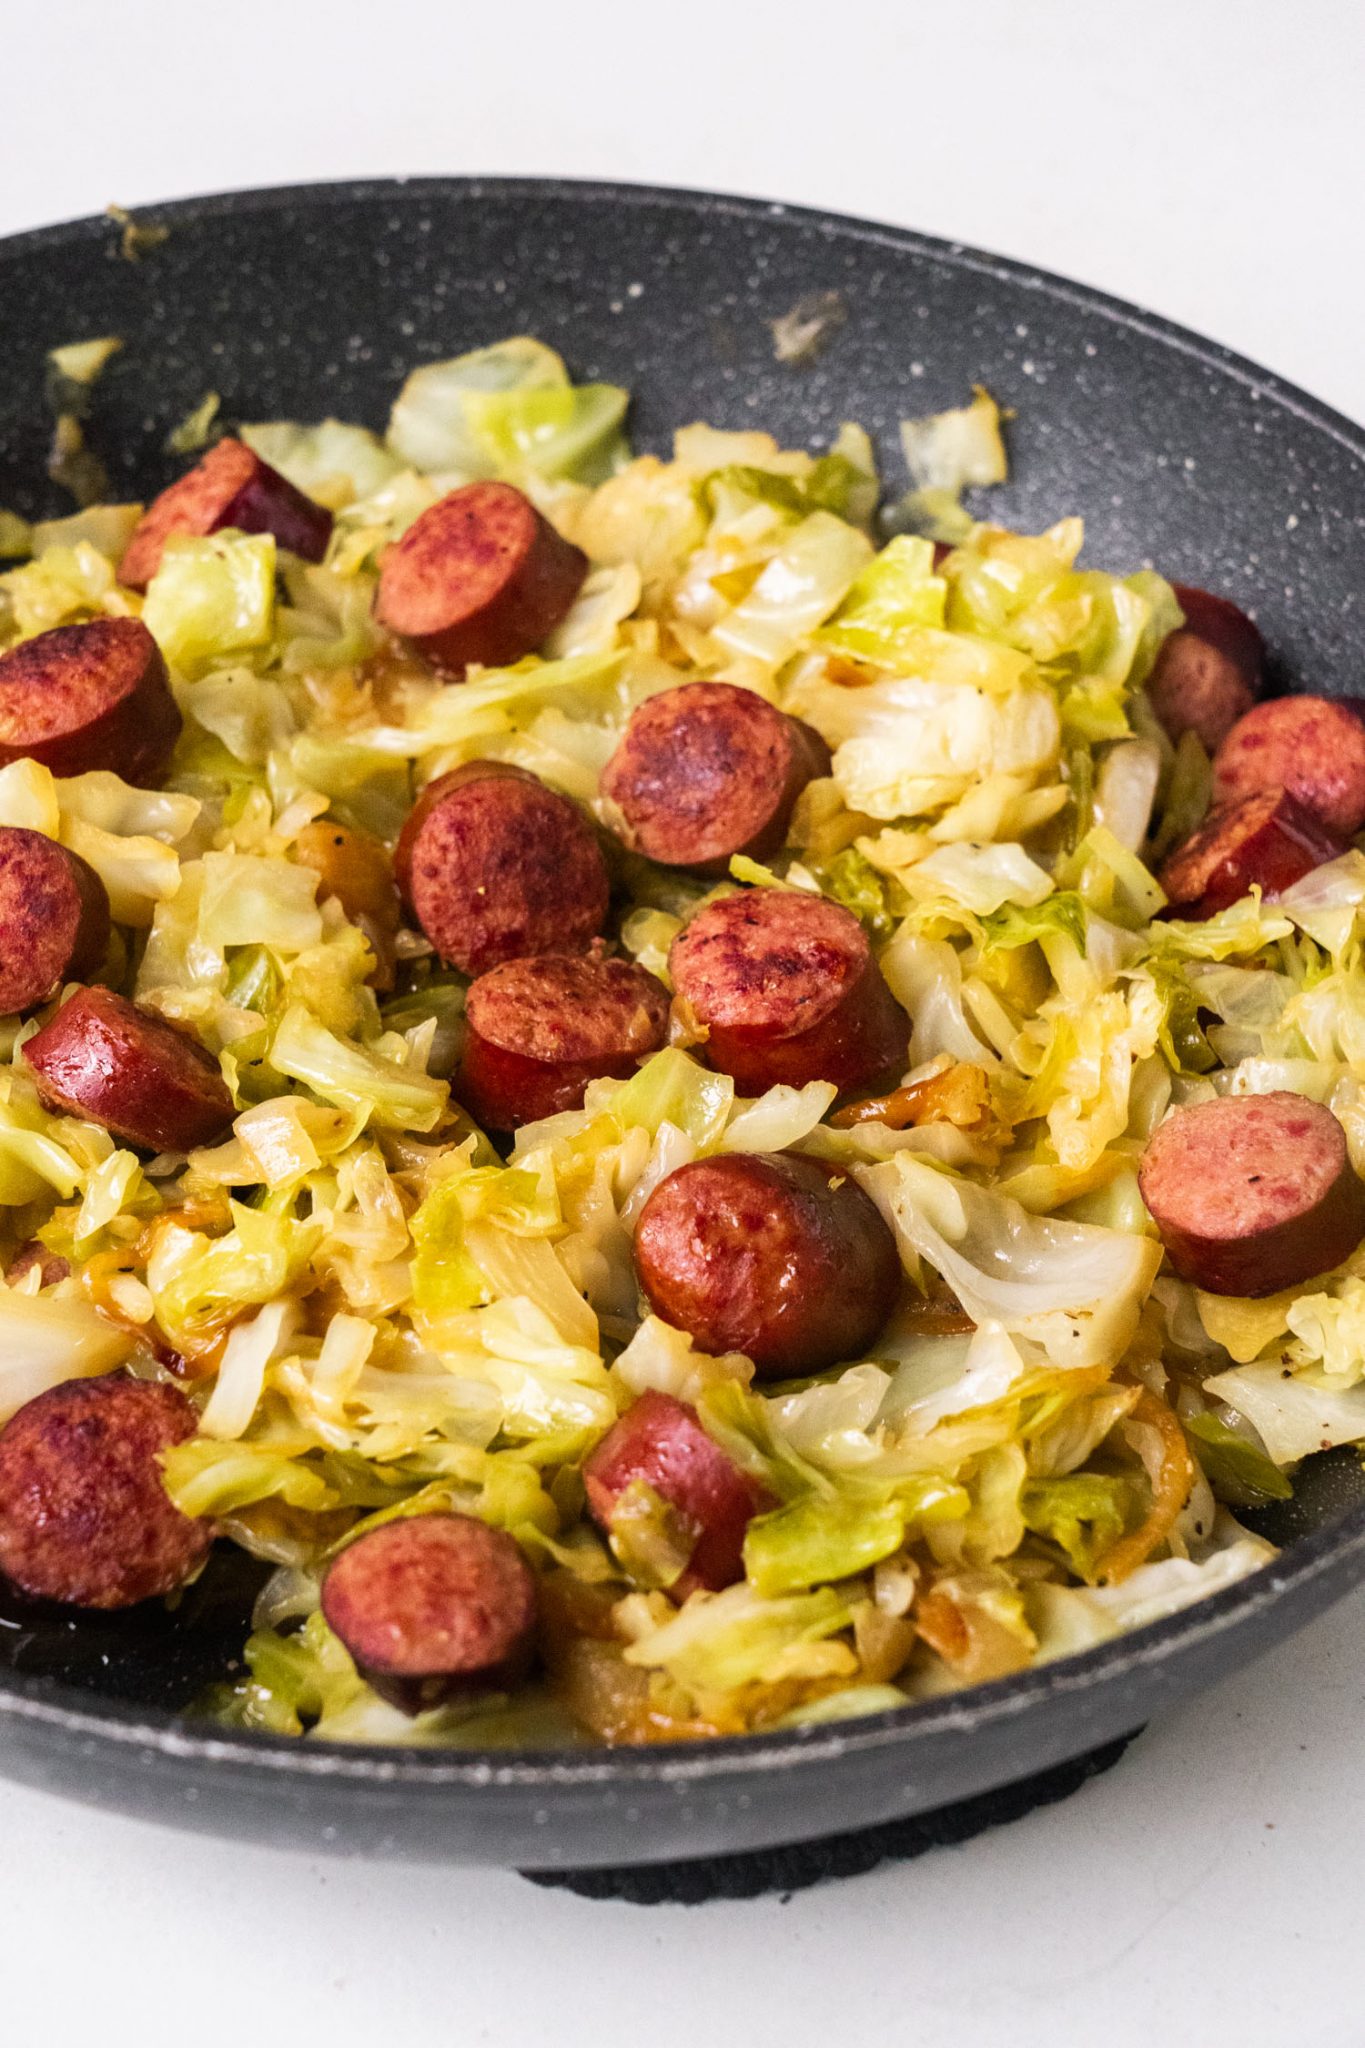 Fried Cabbage With Sausage - Brooklyn Farm Girl